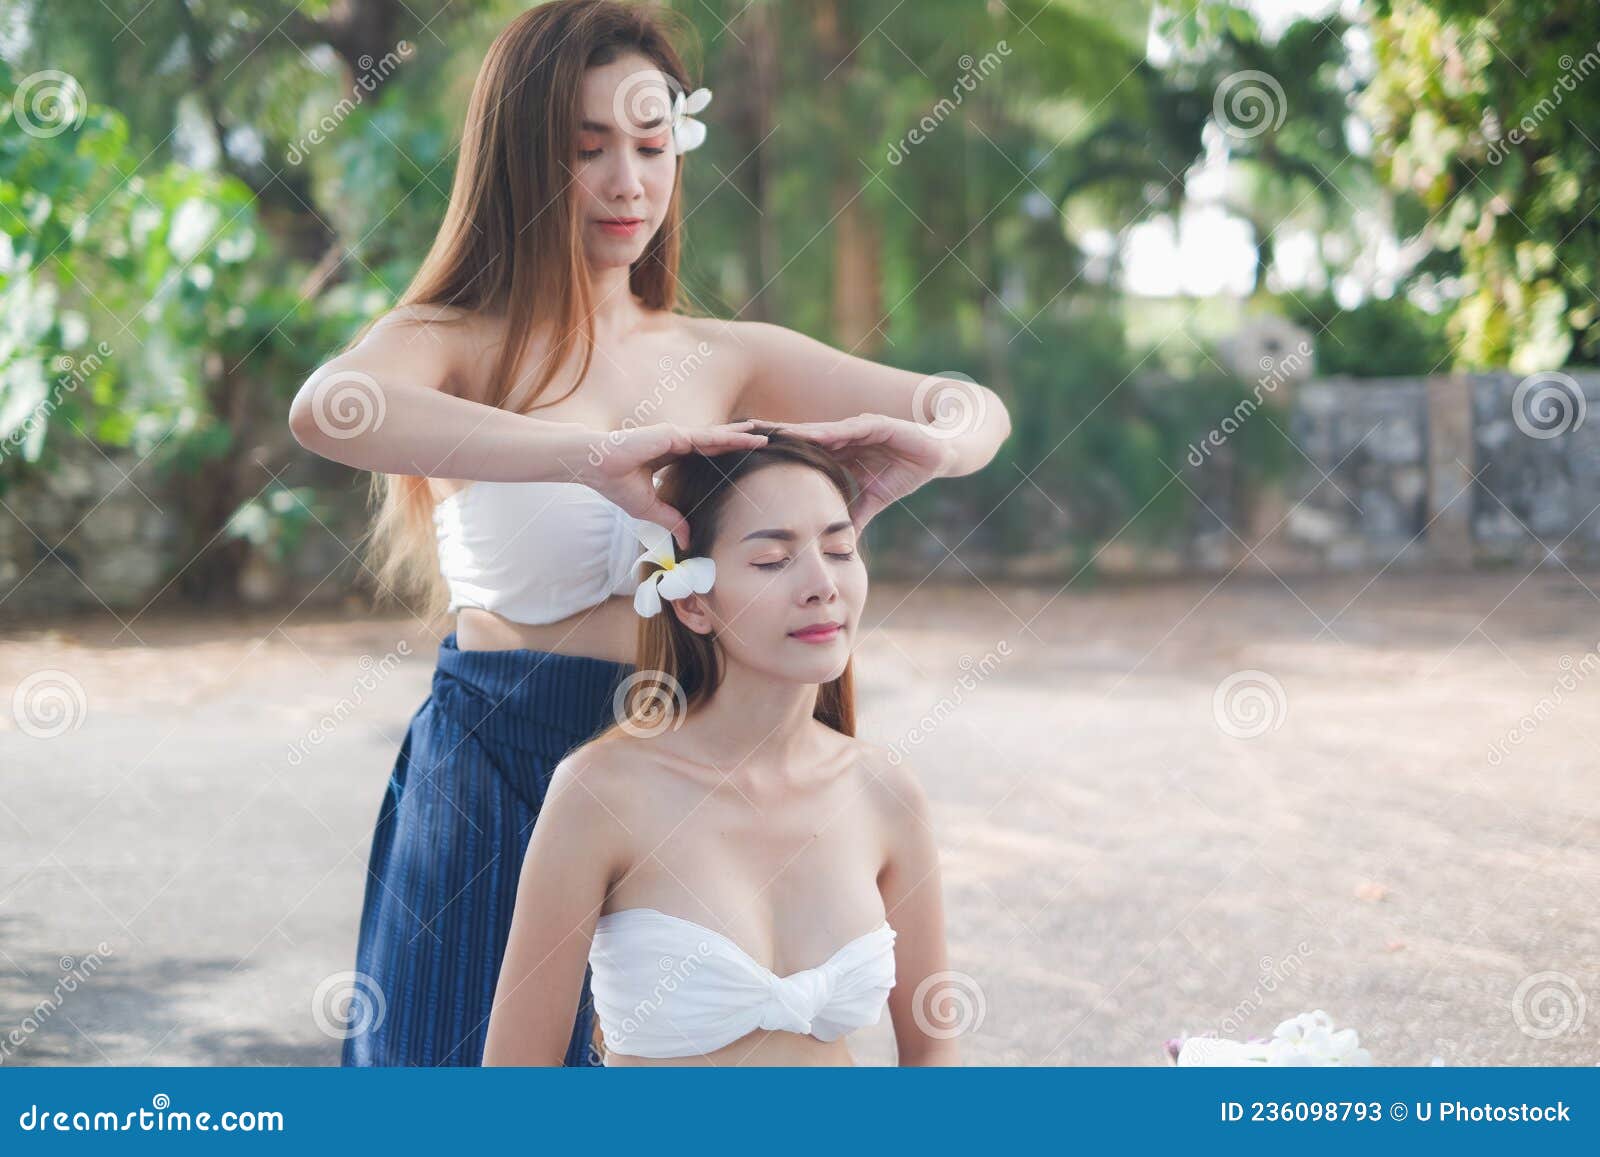 Two Asia Women Doing Spa Massage Together In Outdoor Stock Image Image Of Massage Resting